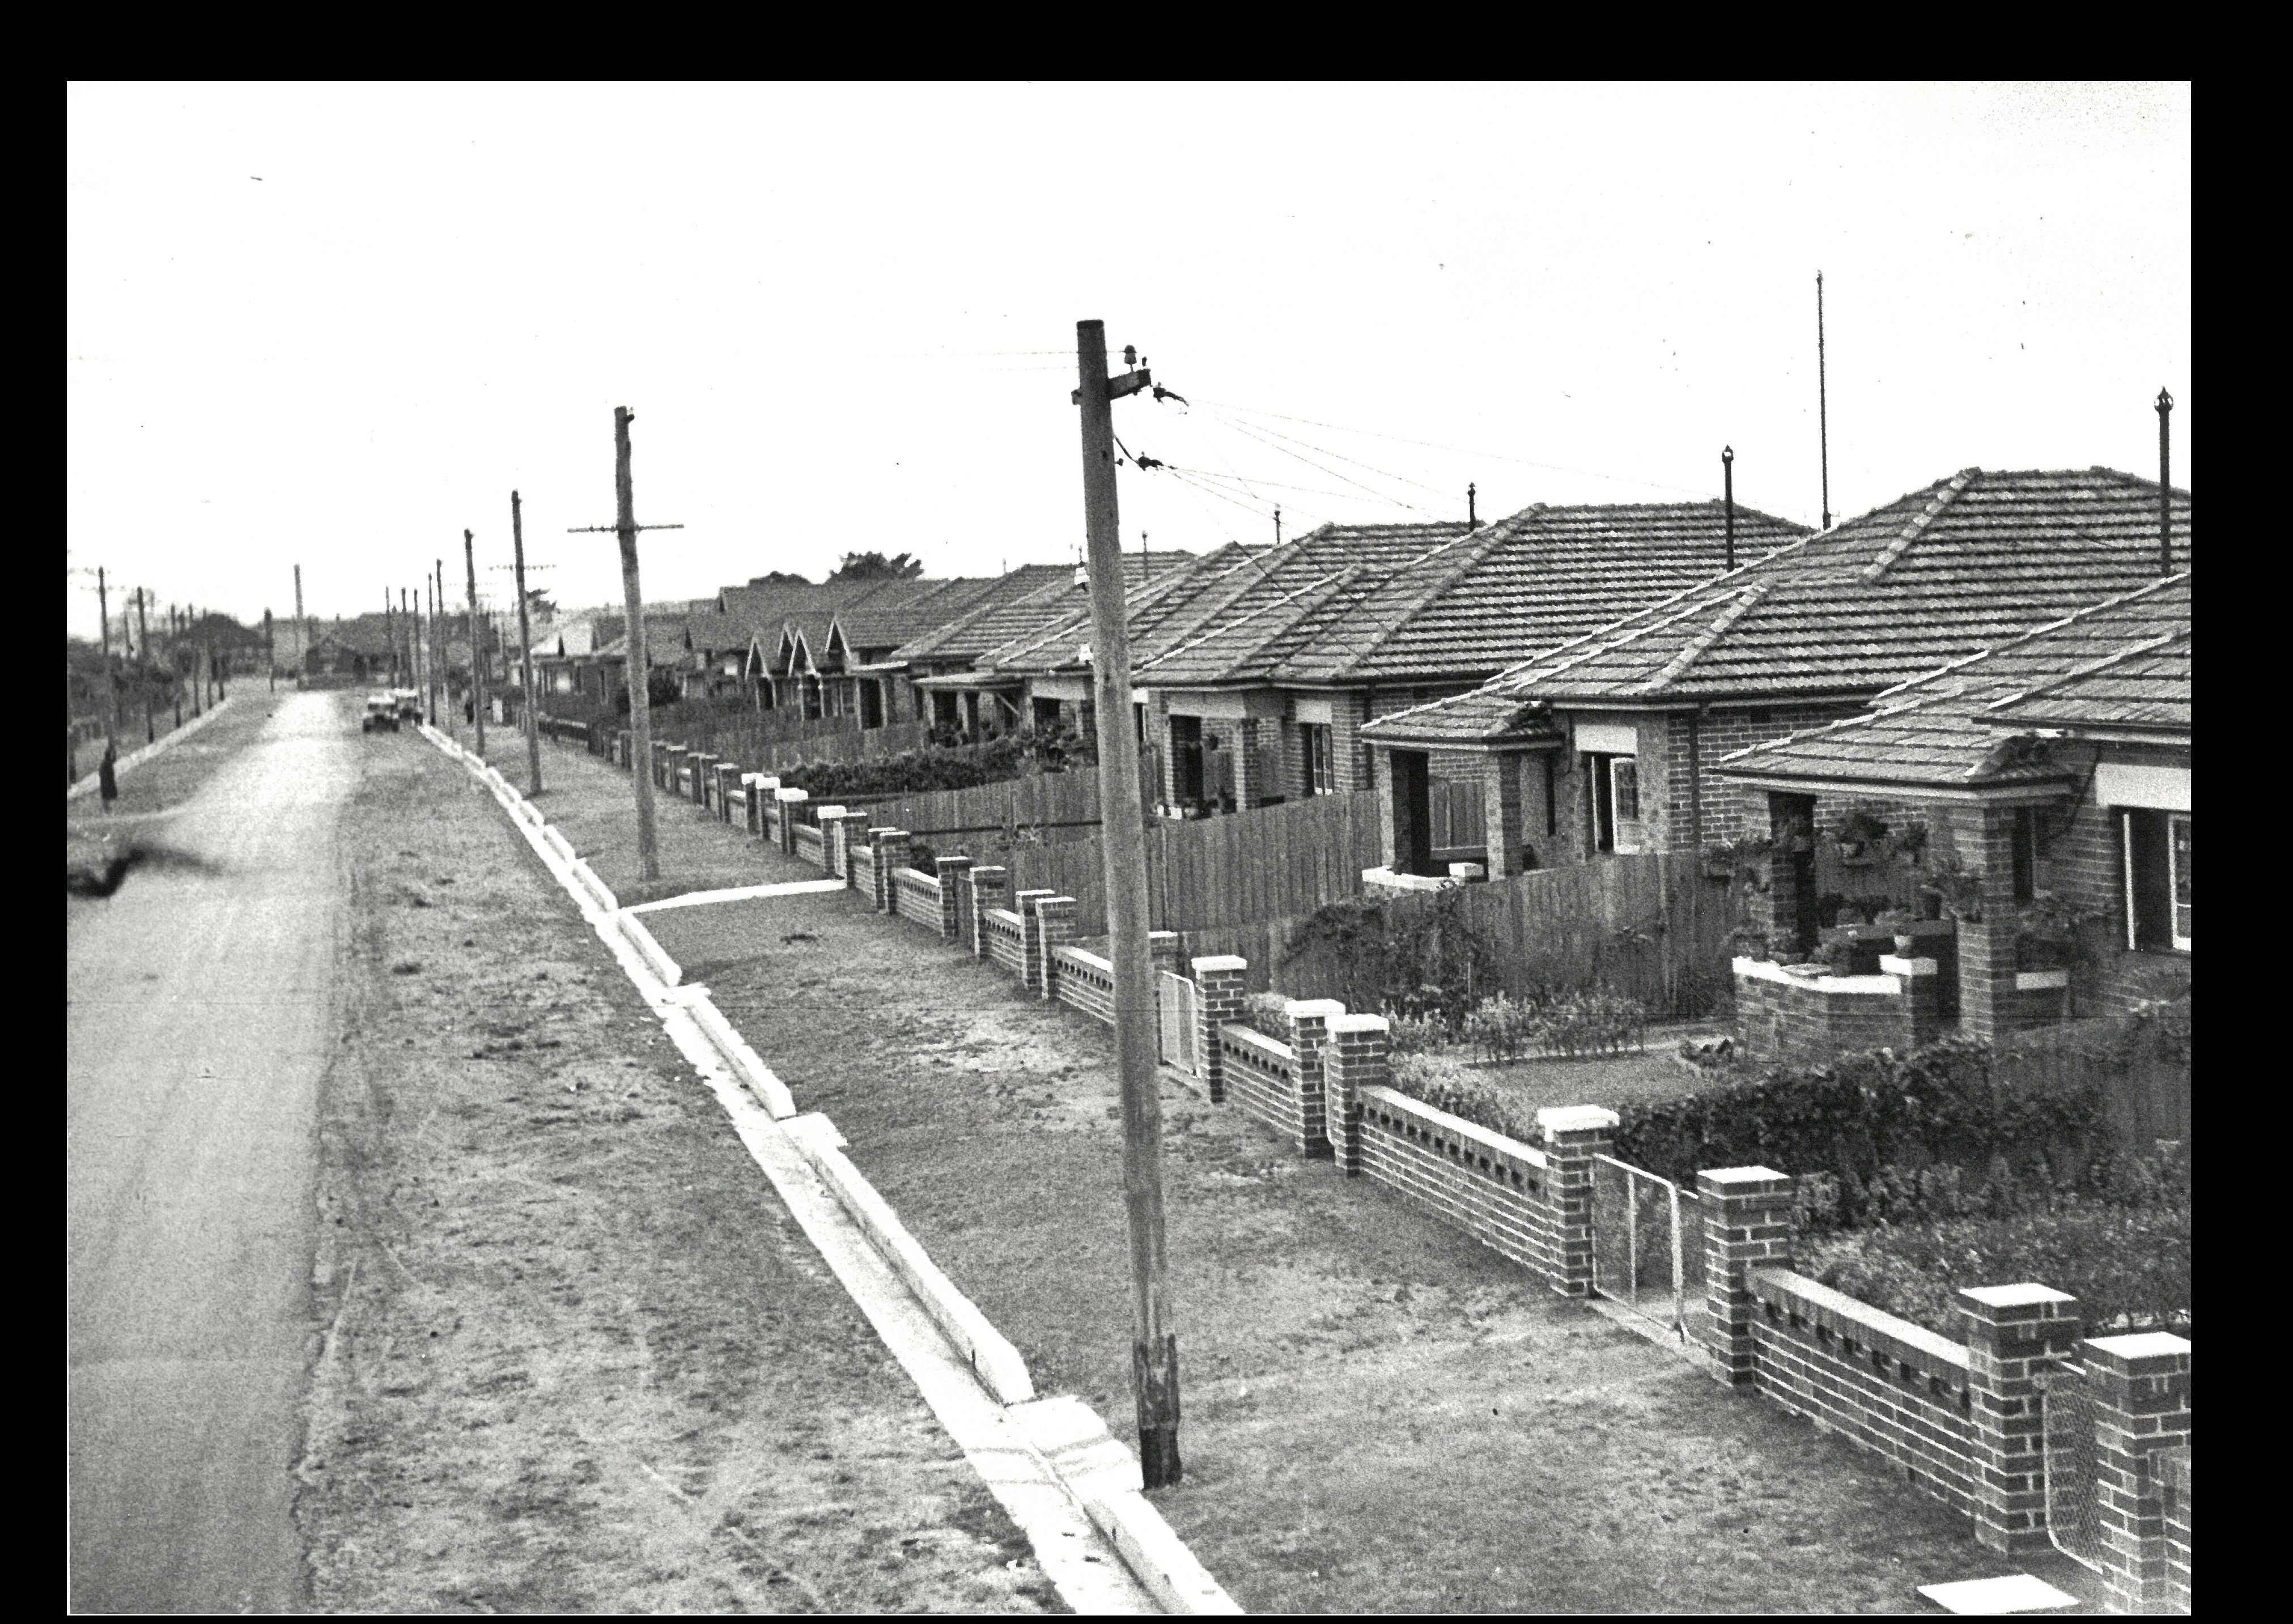 historical photo of houses along a street